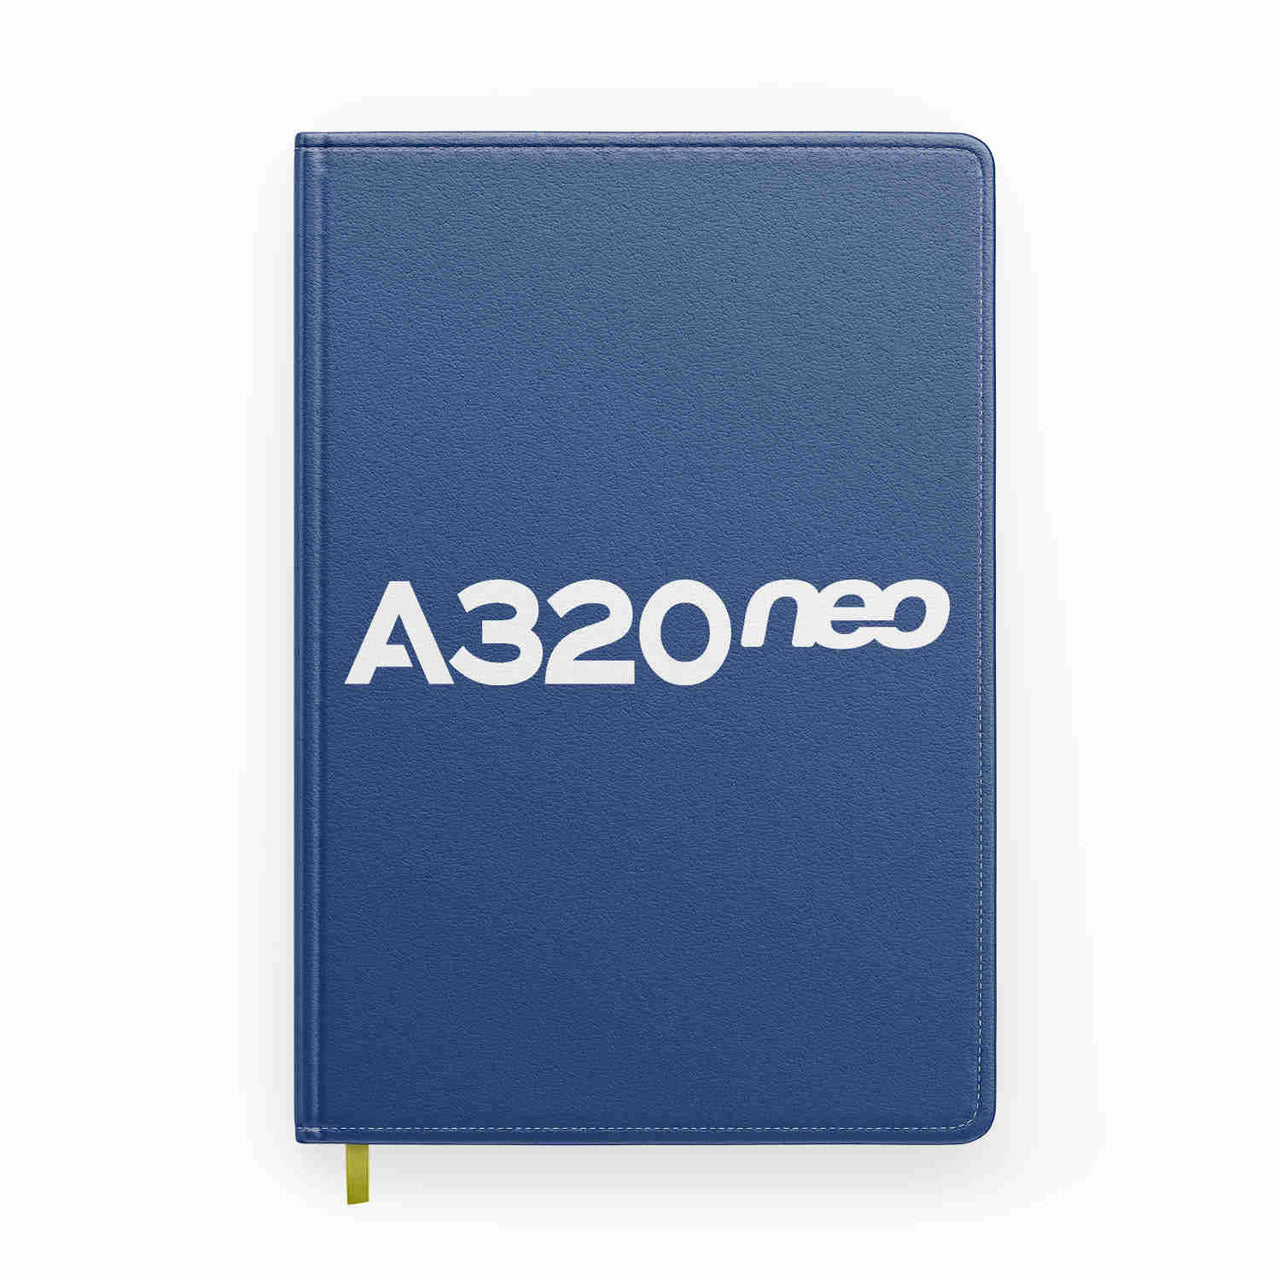 A320neo & Text Designed Notebooks